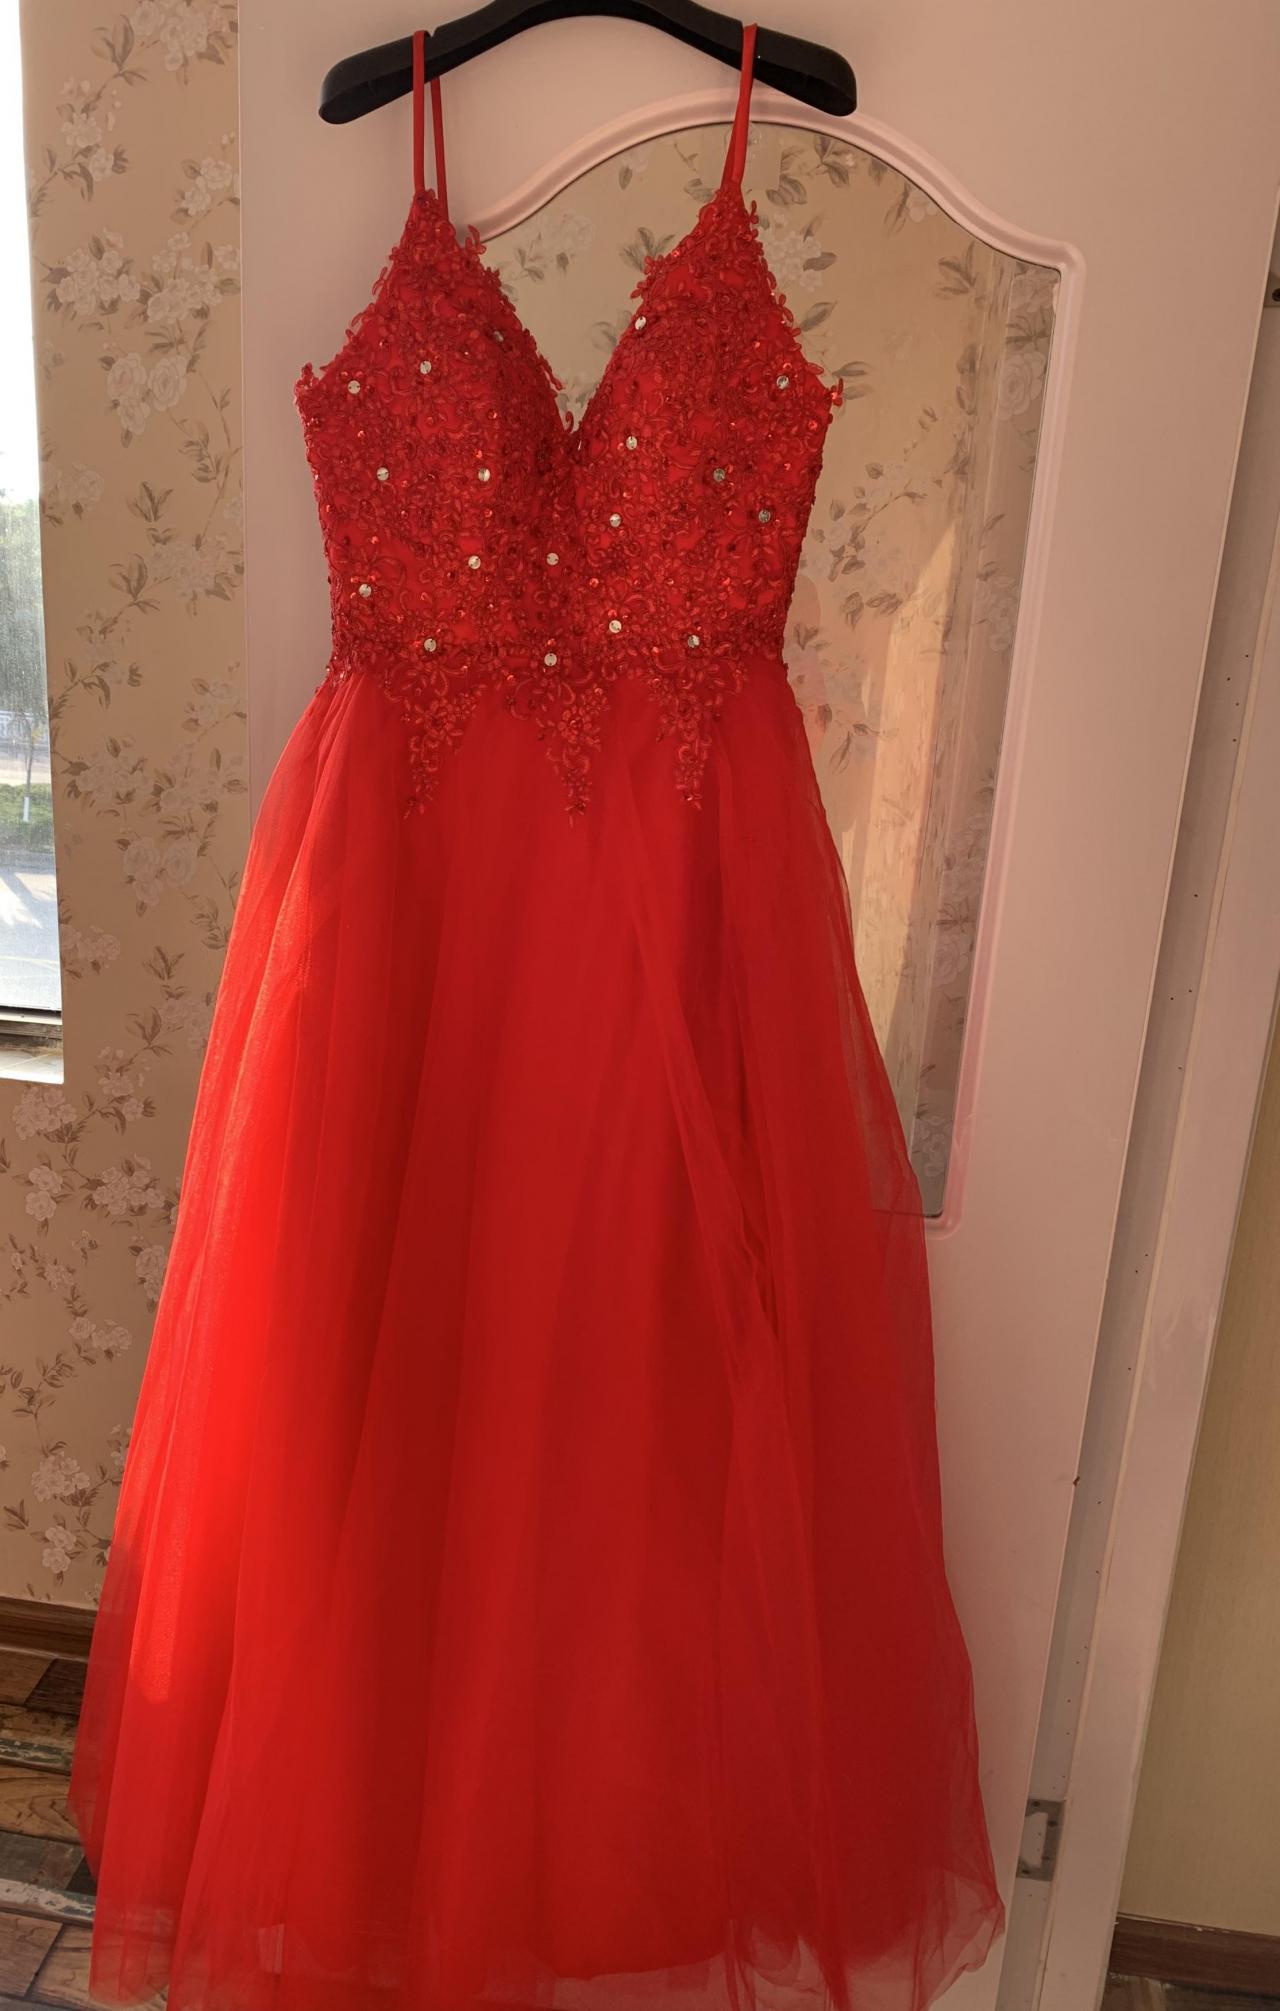 Spaghetti Strap Prom Dress,lace Party Dress,charming Sexy Red Prom Dress,